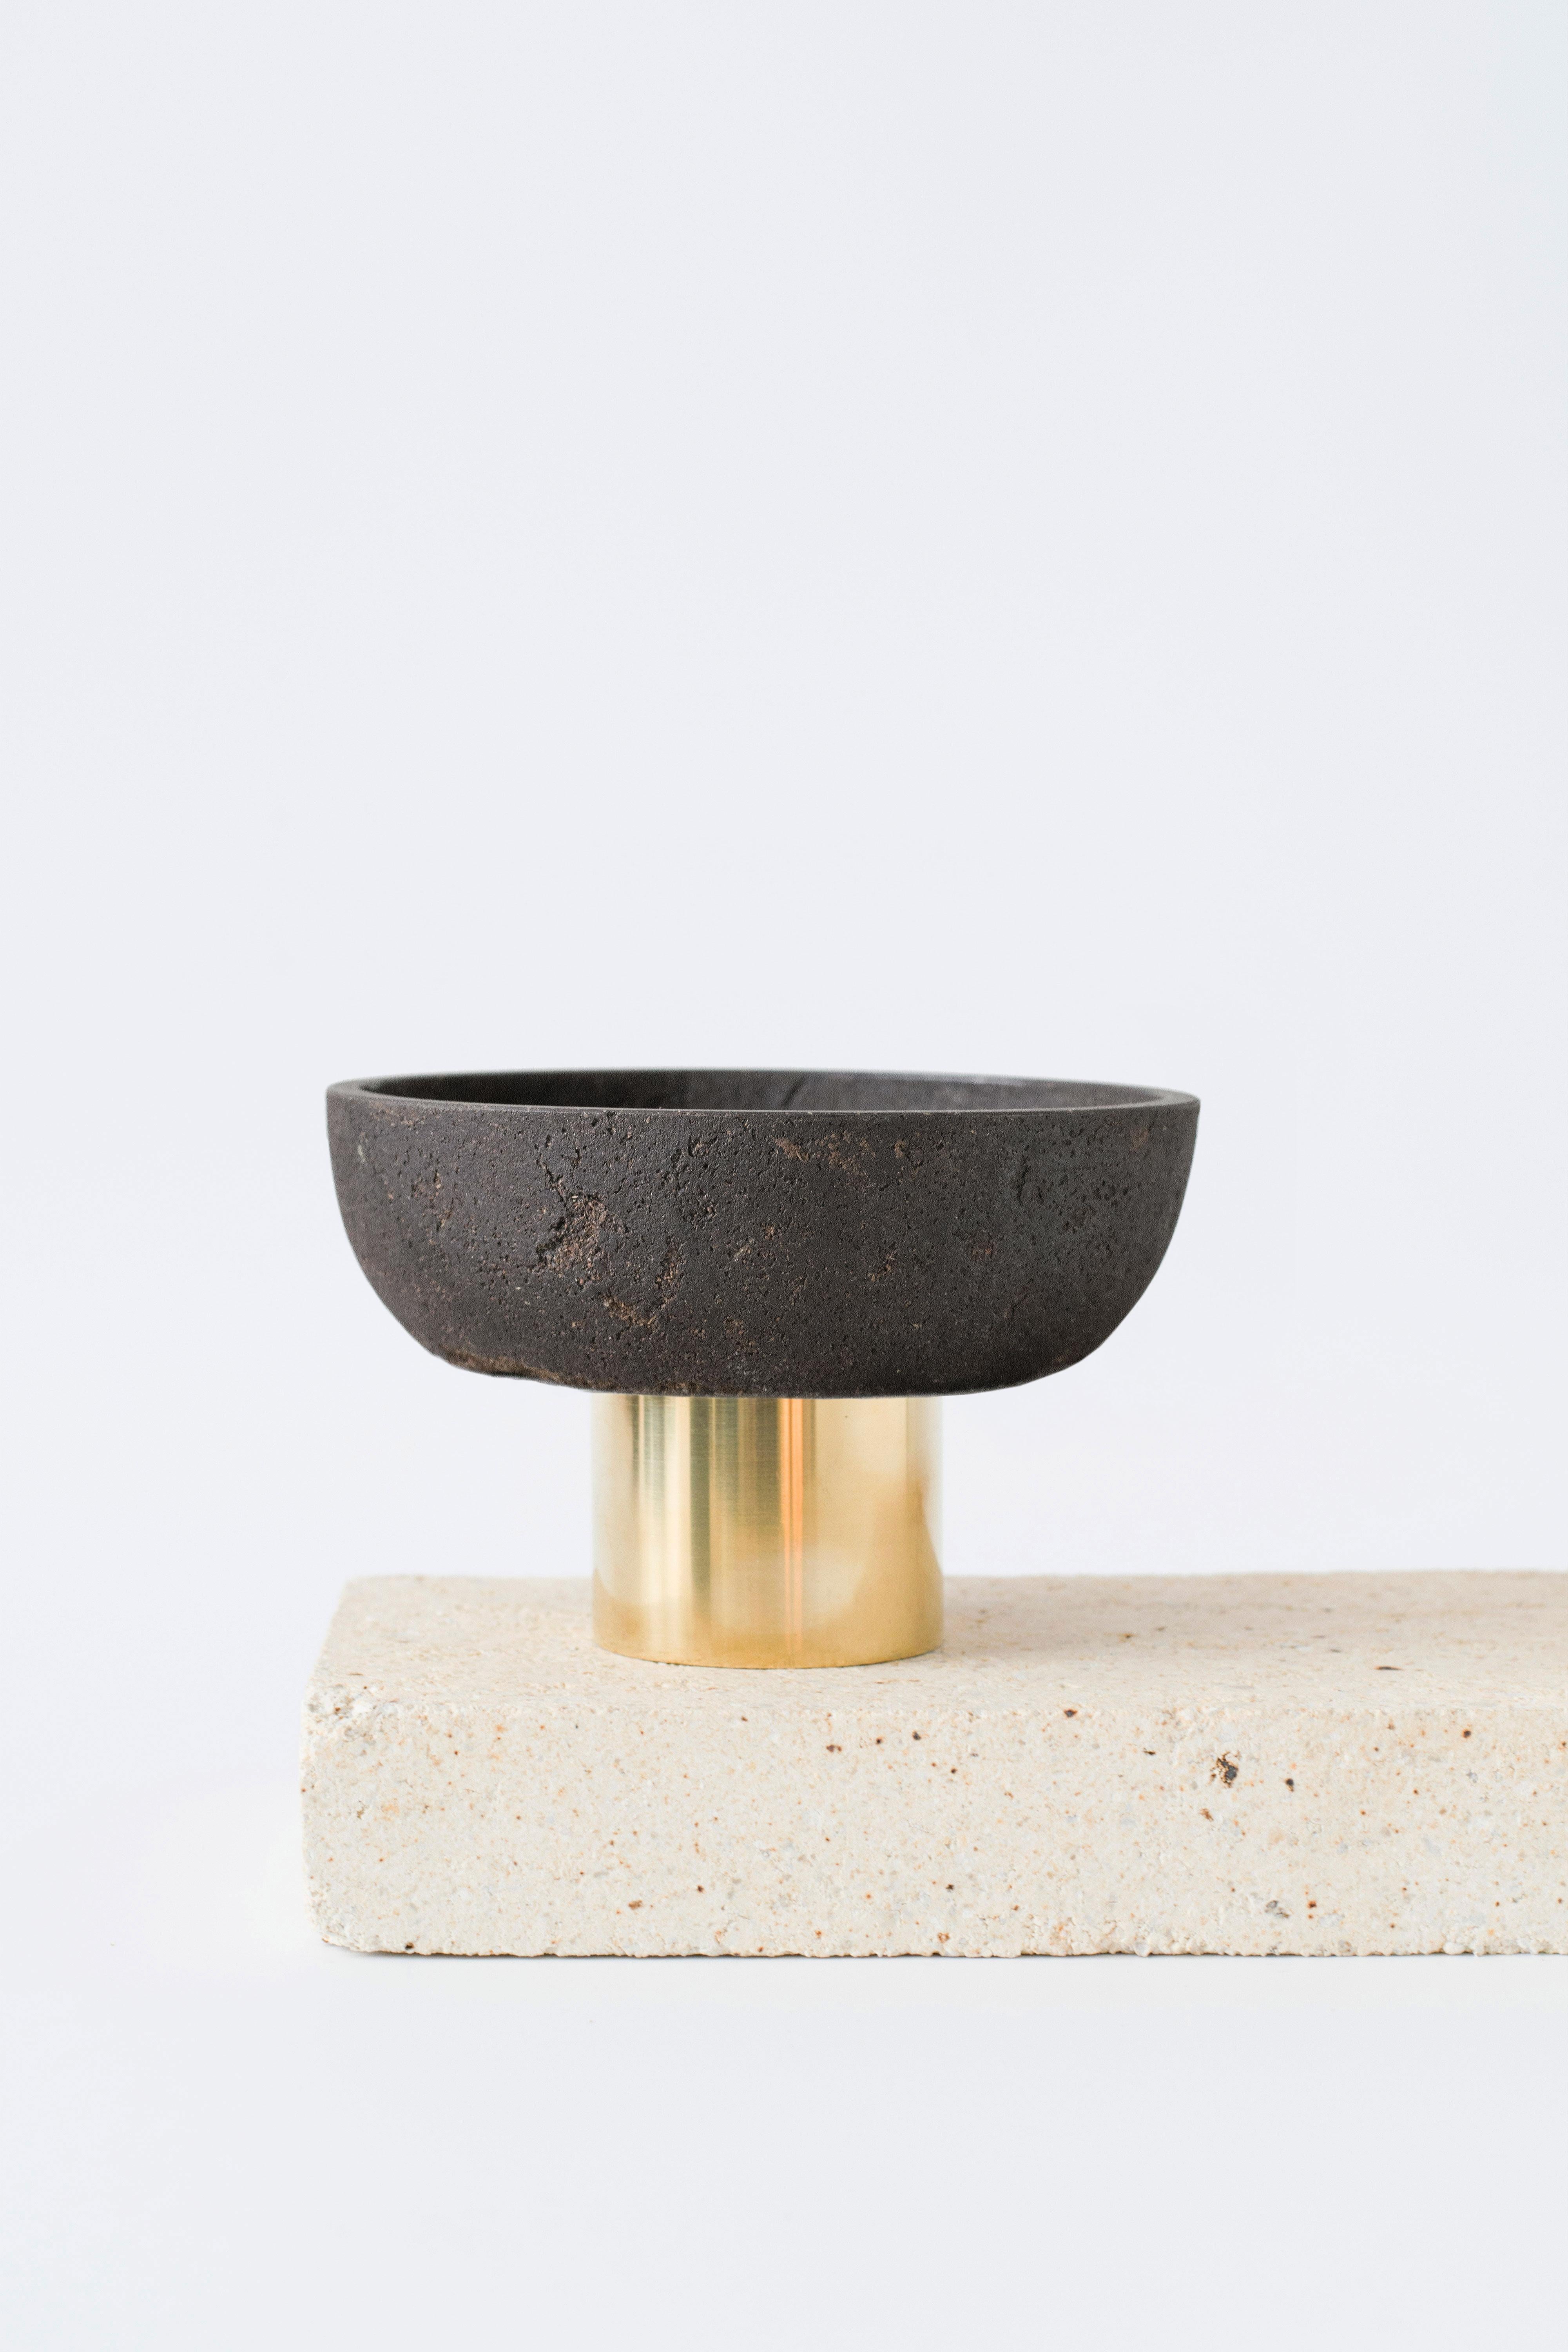 Oak pedestal bowl by Evelina Kudabaite Studio
Handmade
Materials: oak, brass
Dimensions: H 7.5 x D 12 cm
Colour: dark brown
Notes: for dry use

Since 2015, product designer Evelina Kudabaite keeps on developing and making GIRIA objects. Designer